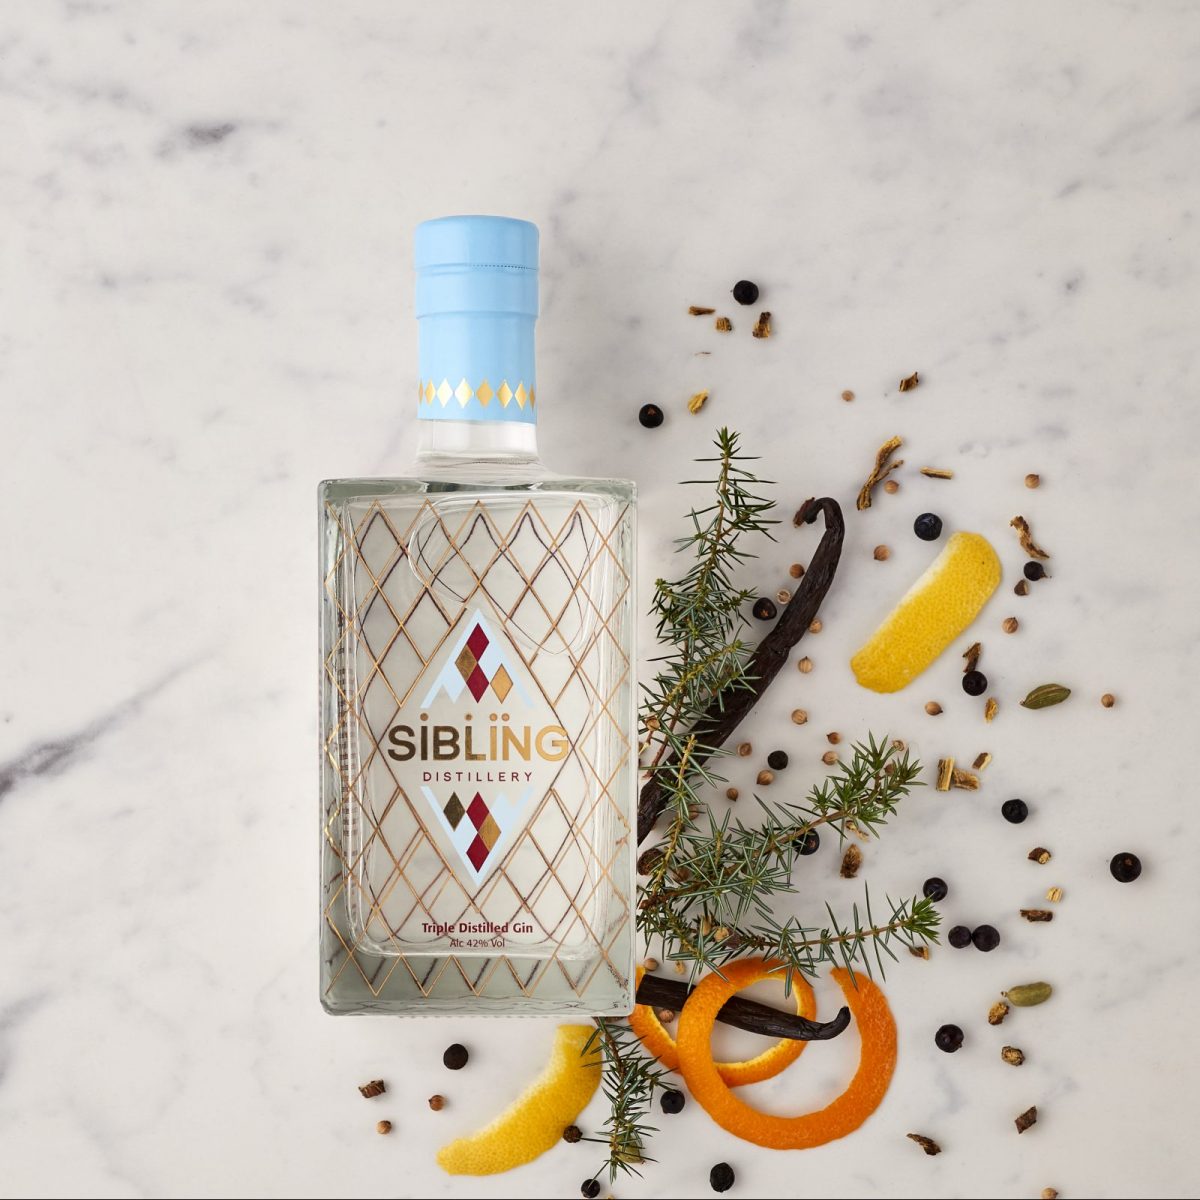 A glimpse of diverse products by Sibling Distillery, supporting the UK economy on YouK.